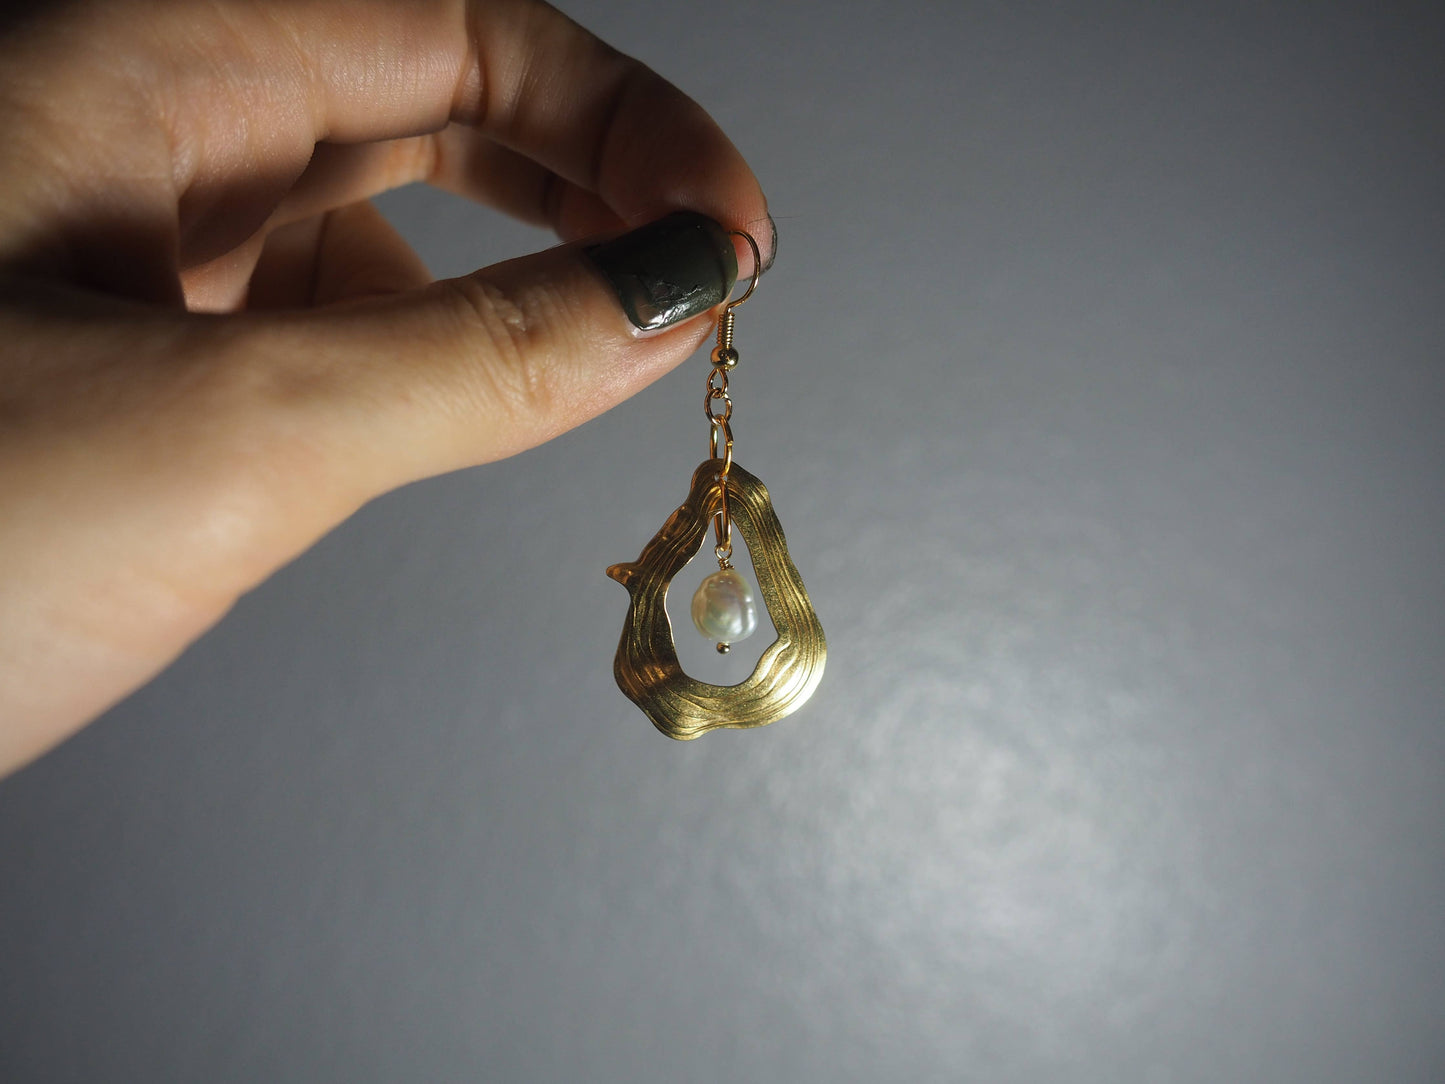 Oyster Pearl Earrings: Gold plated (nickel free) ball posts